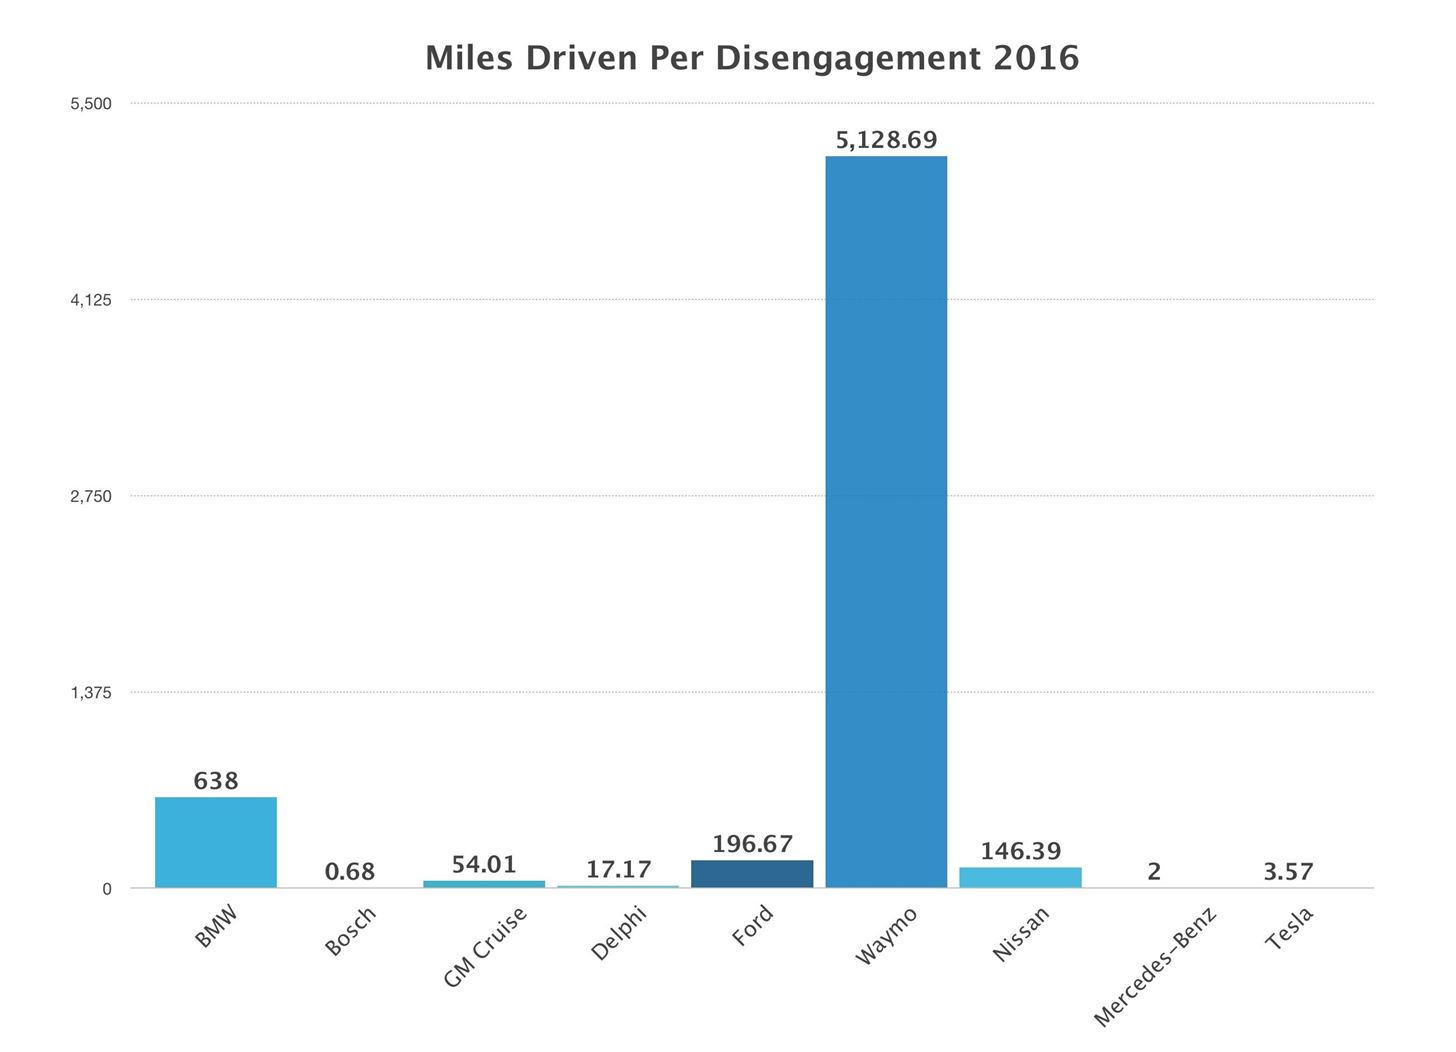 2016 Disengagement Reports Show Waymo Absolutely Crushing the Competition on Every Single Metric